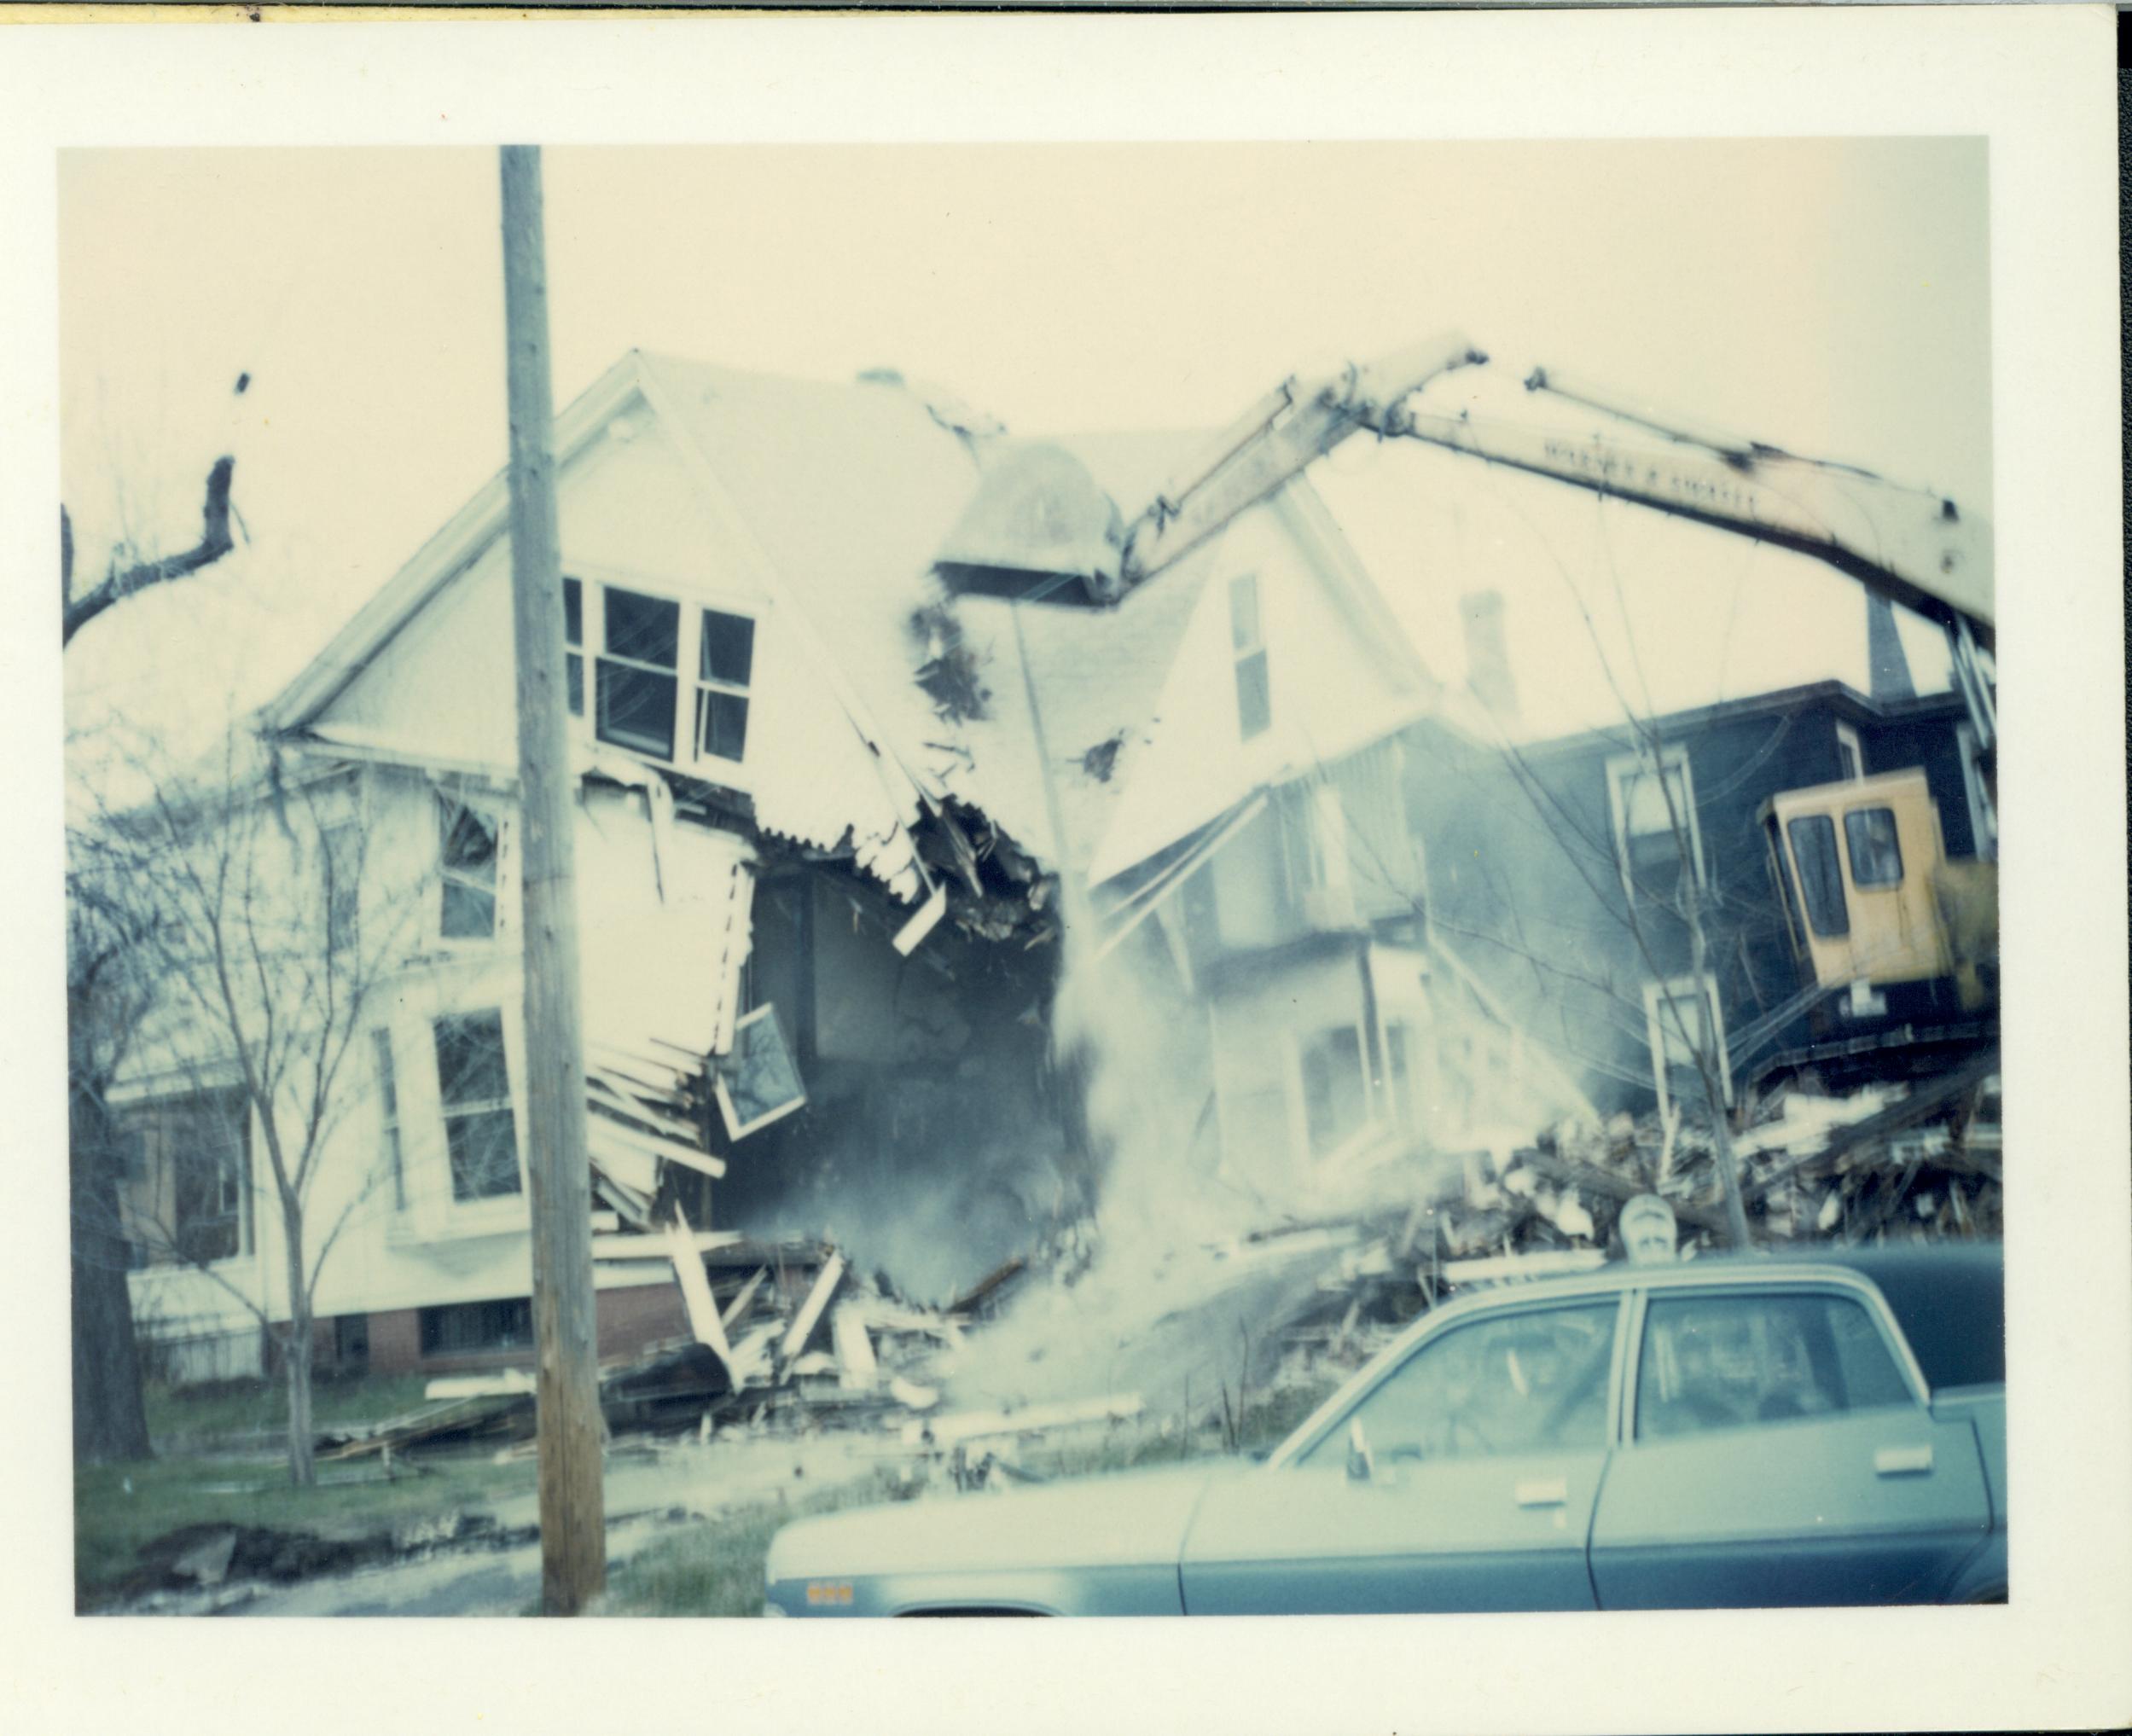 House owned by William Hermes in process of being razed, Block 7, Lot 8 along 7th Street.  House in background owned by Eleanor Pruett.  Area is now Visitor Center Looking North from Jackson Street Hermes, Pruett, Visitor Center, Jackson Street, razing